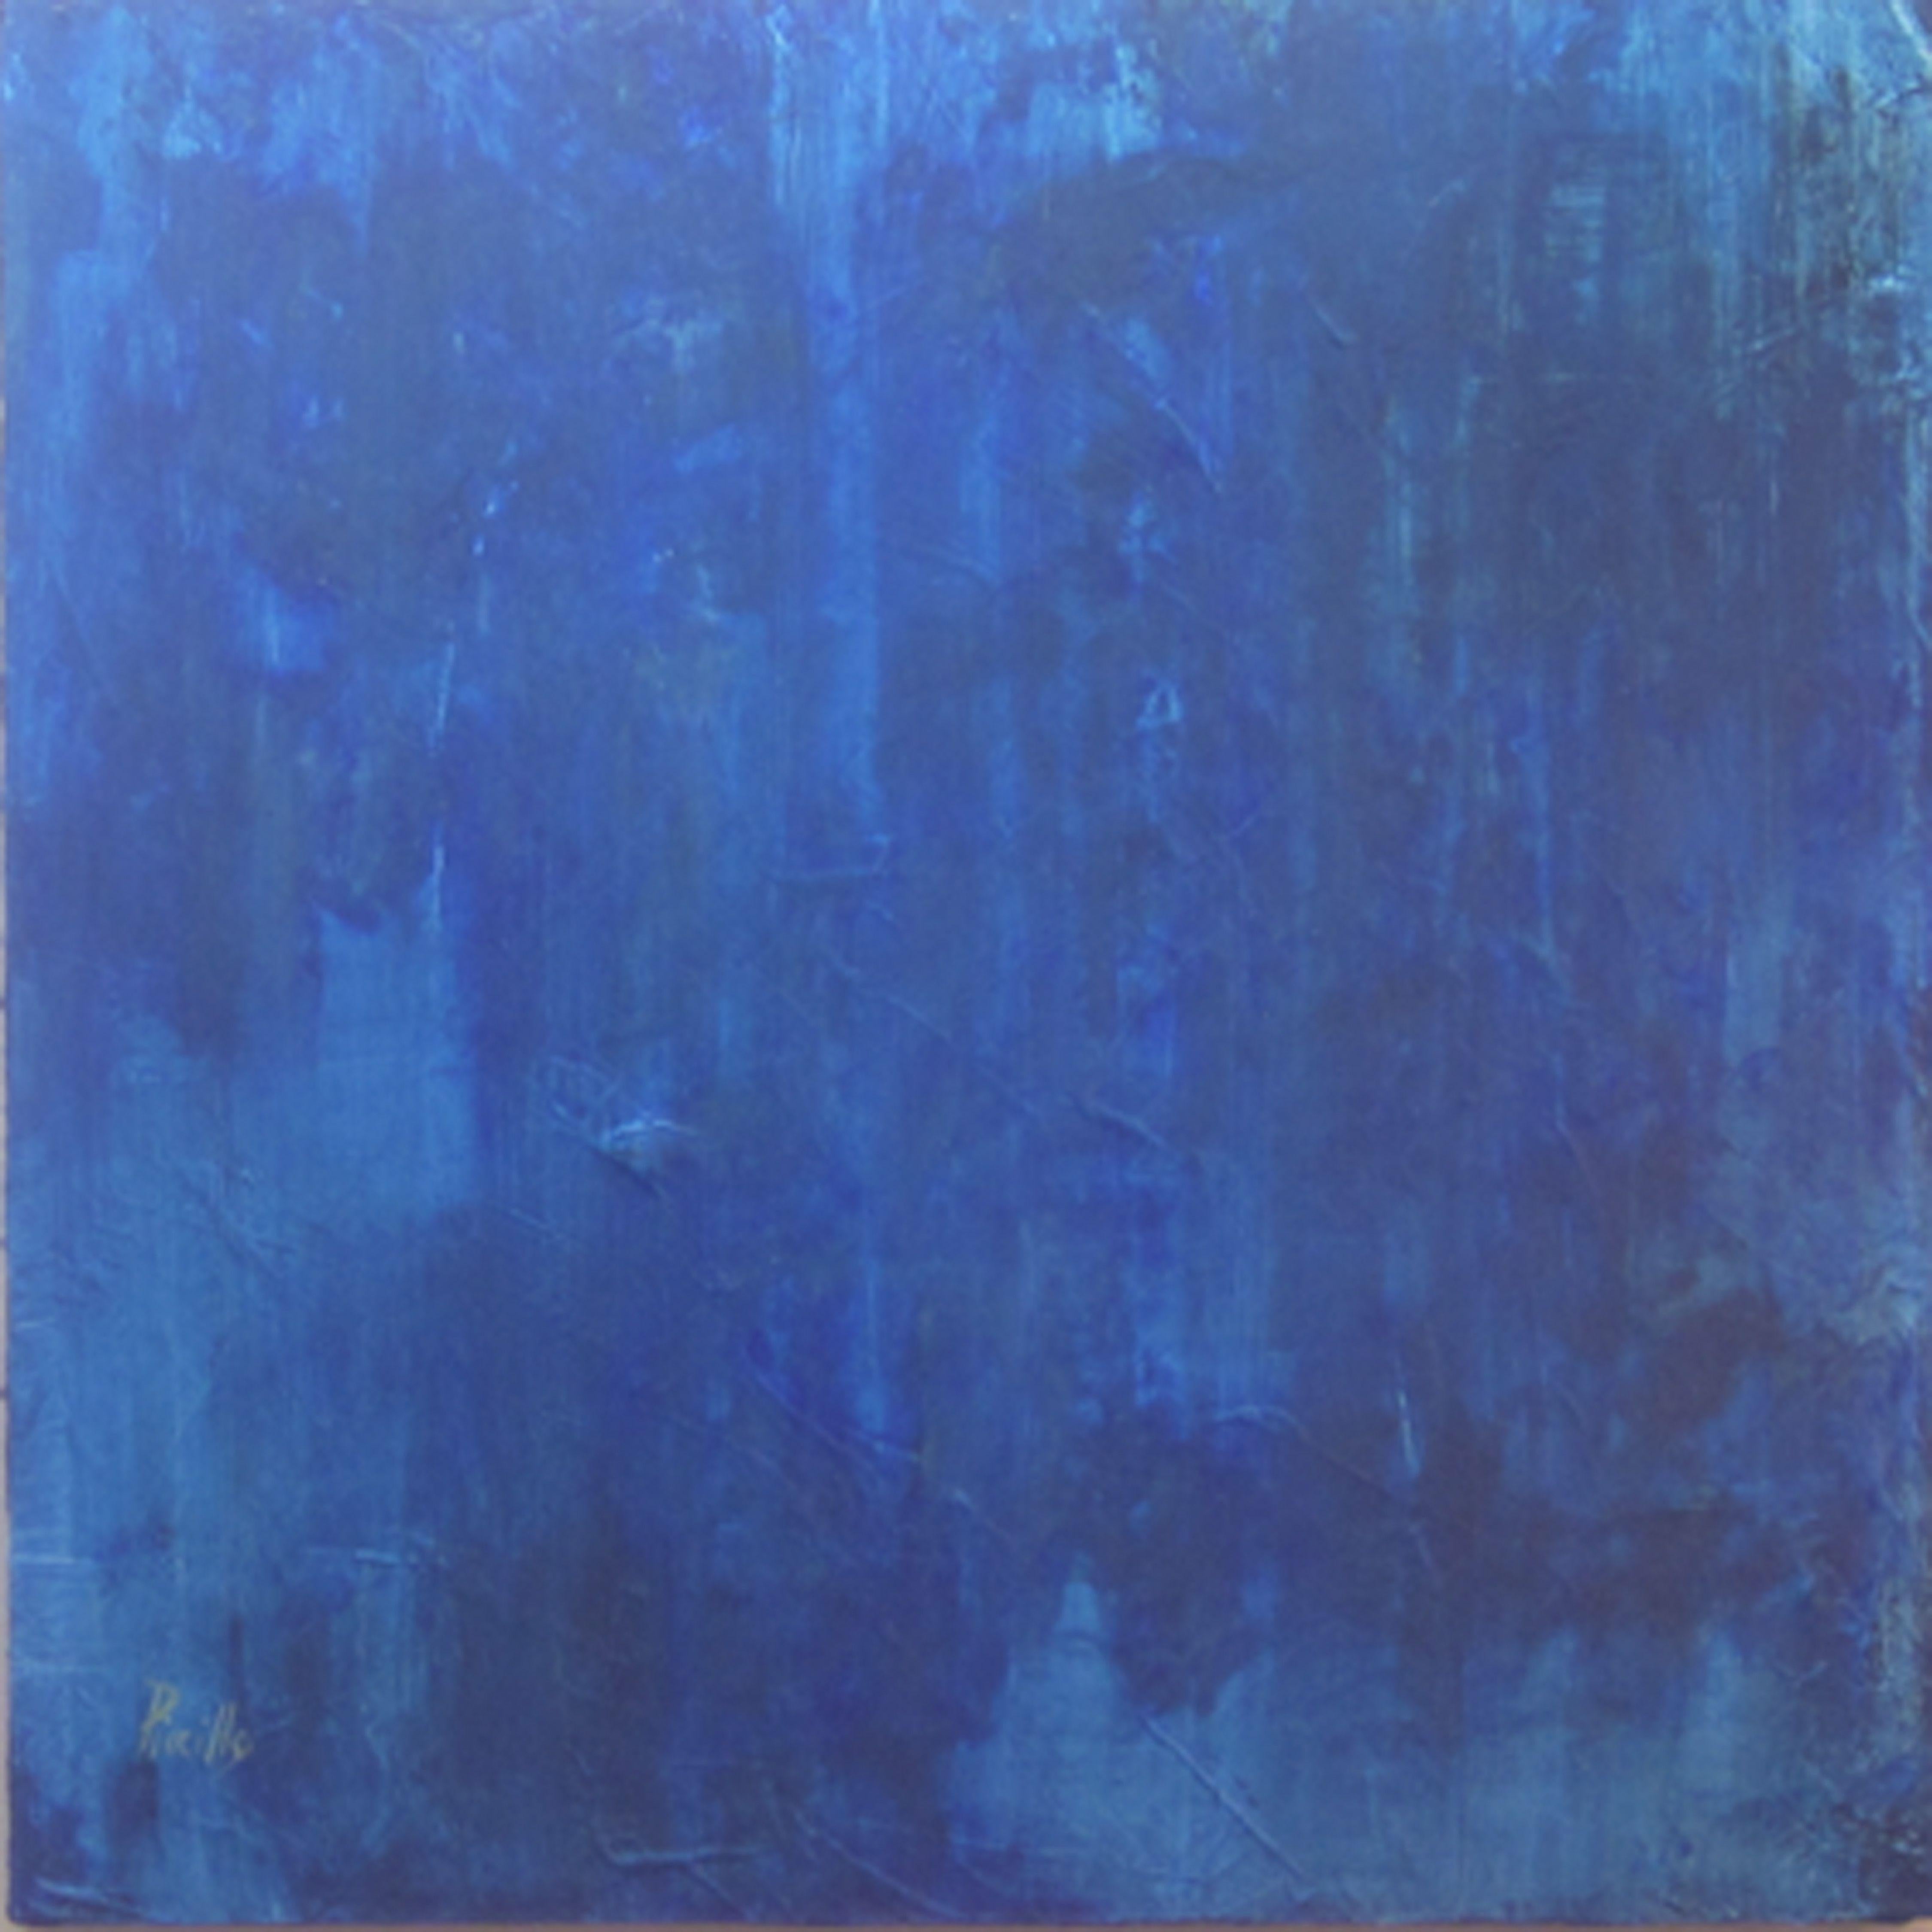 " Blue #1 " a contemporary, modern abstract painting by joseph piccillo is a 24 x 24 inch color field acrylic on museum stretched canvas. Blue is a cool color but i find it can stir but calm and excitement. It is my grandson's favorite color so I